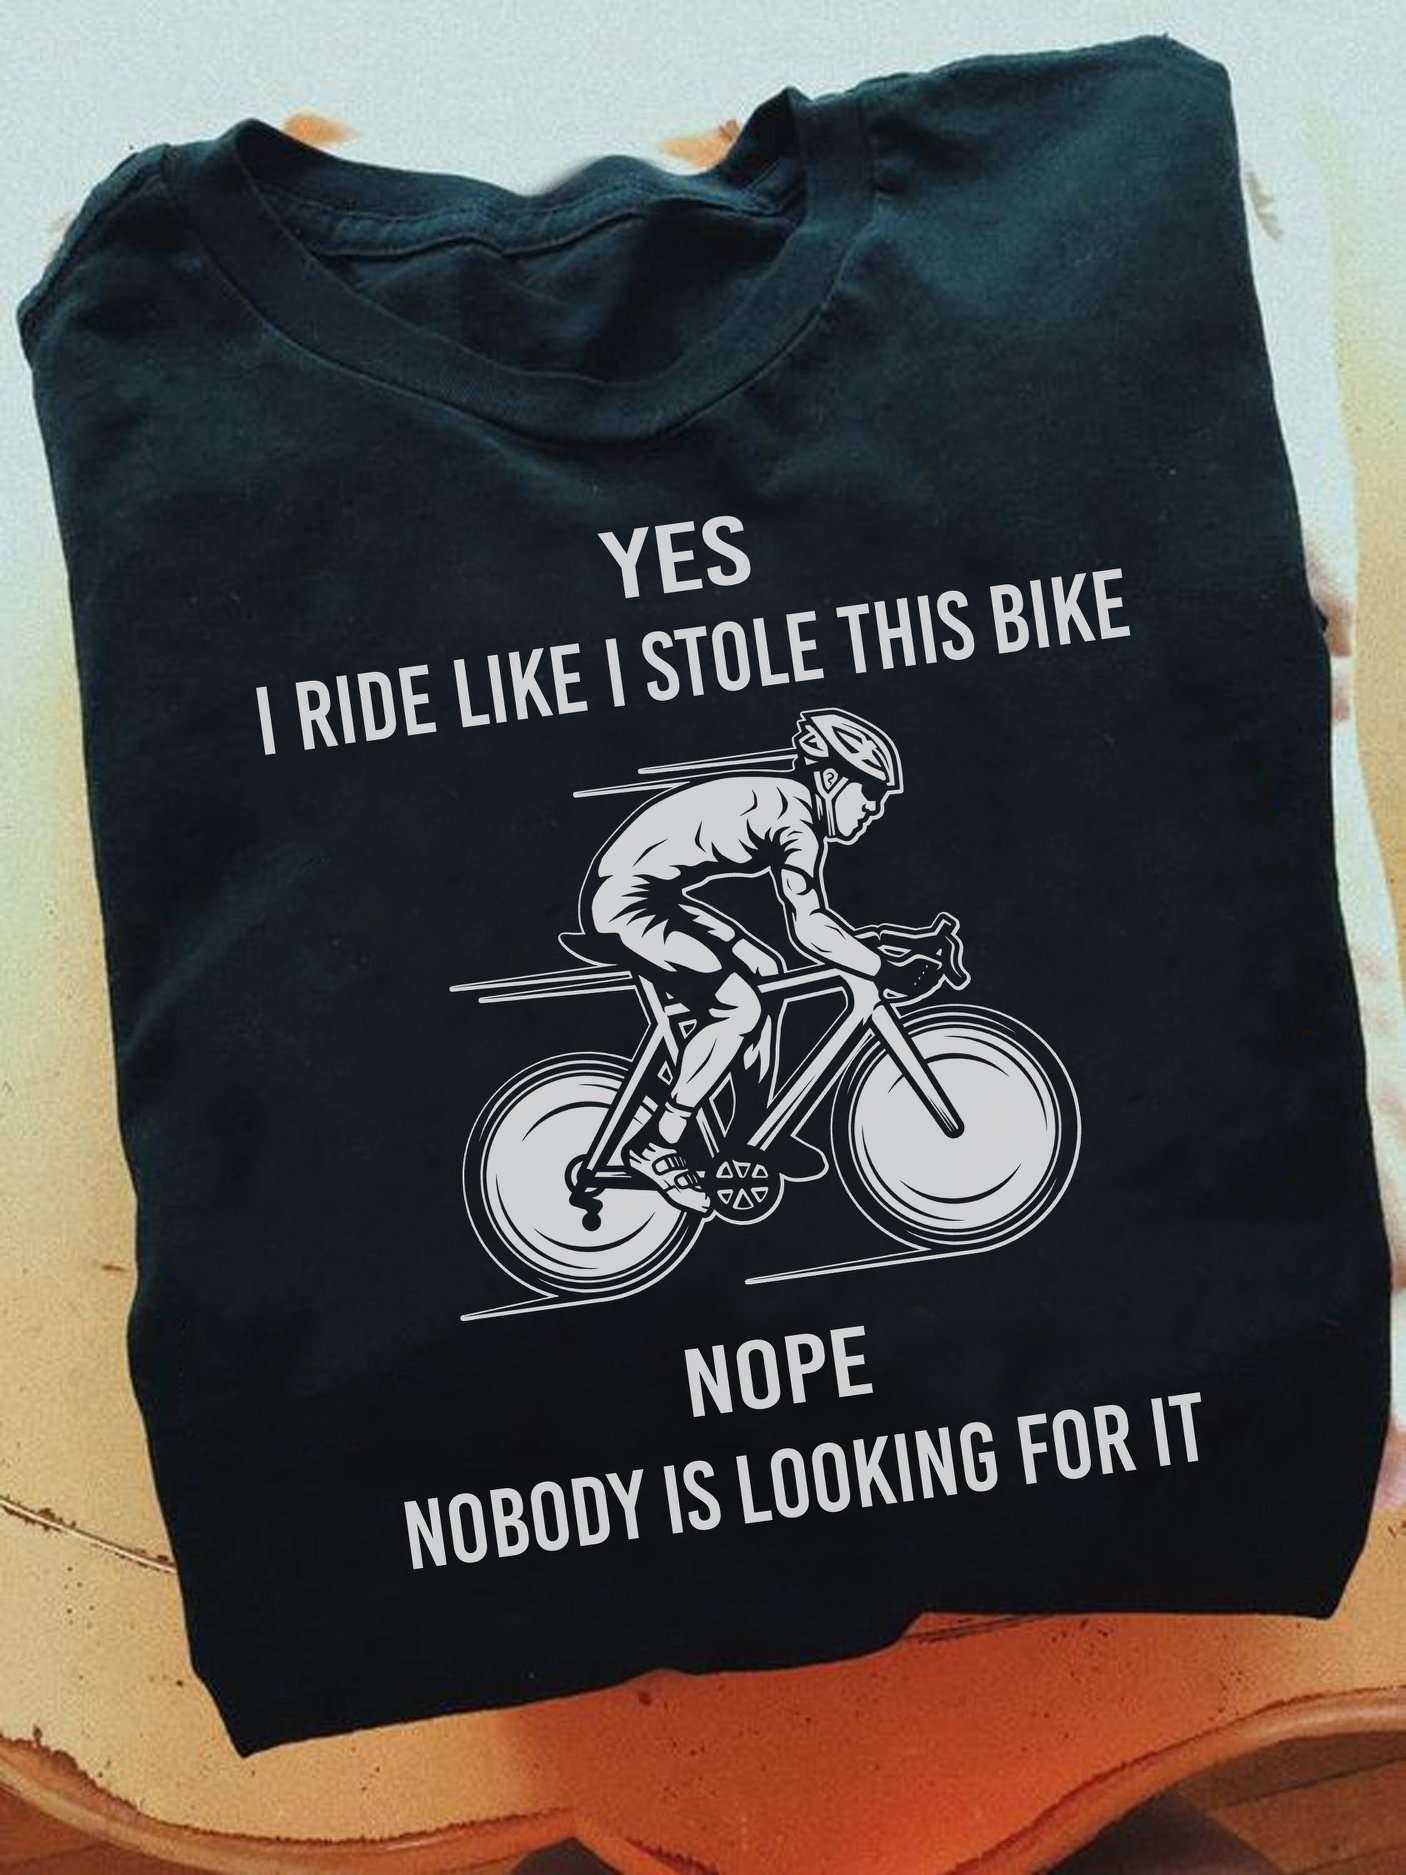 Yes I ride like I stole this bike nope nobody is looking for it - Fast biker